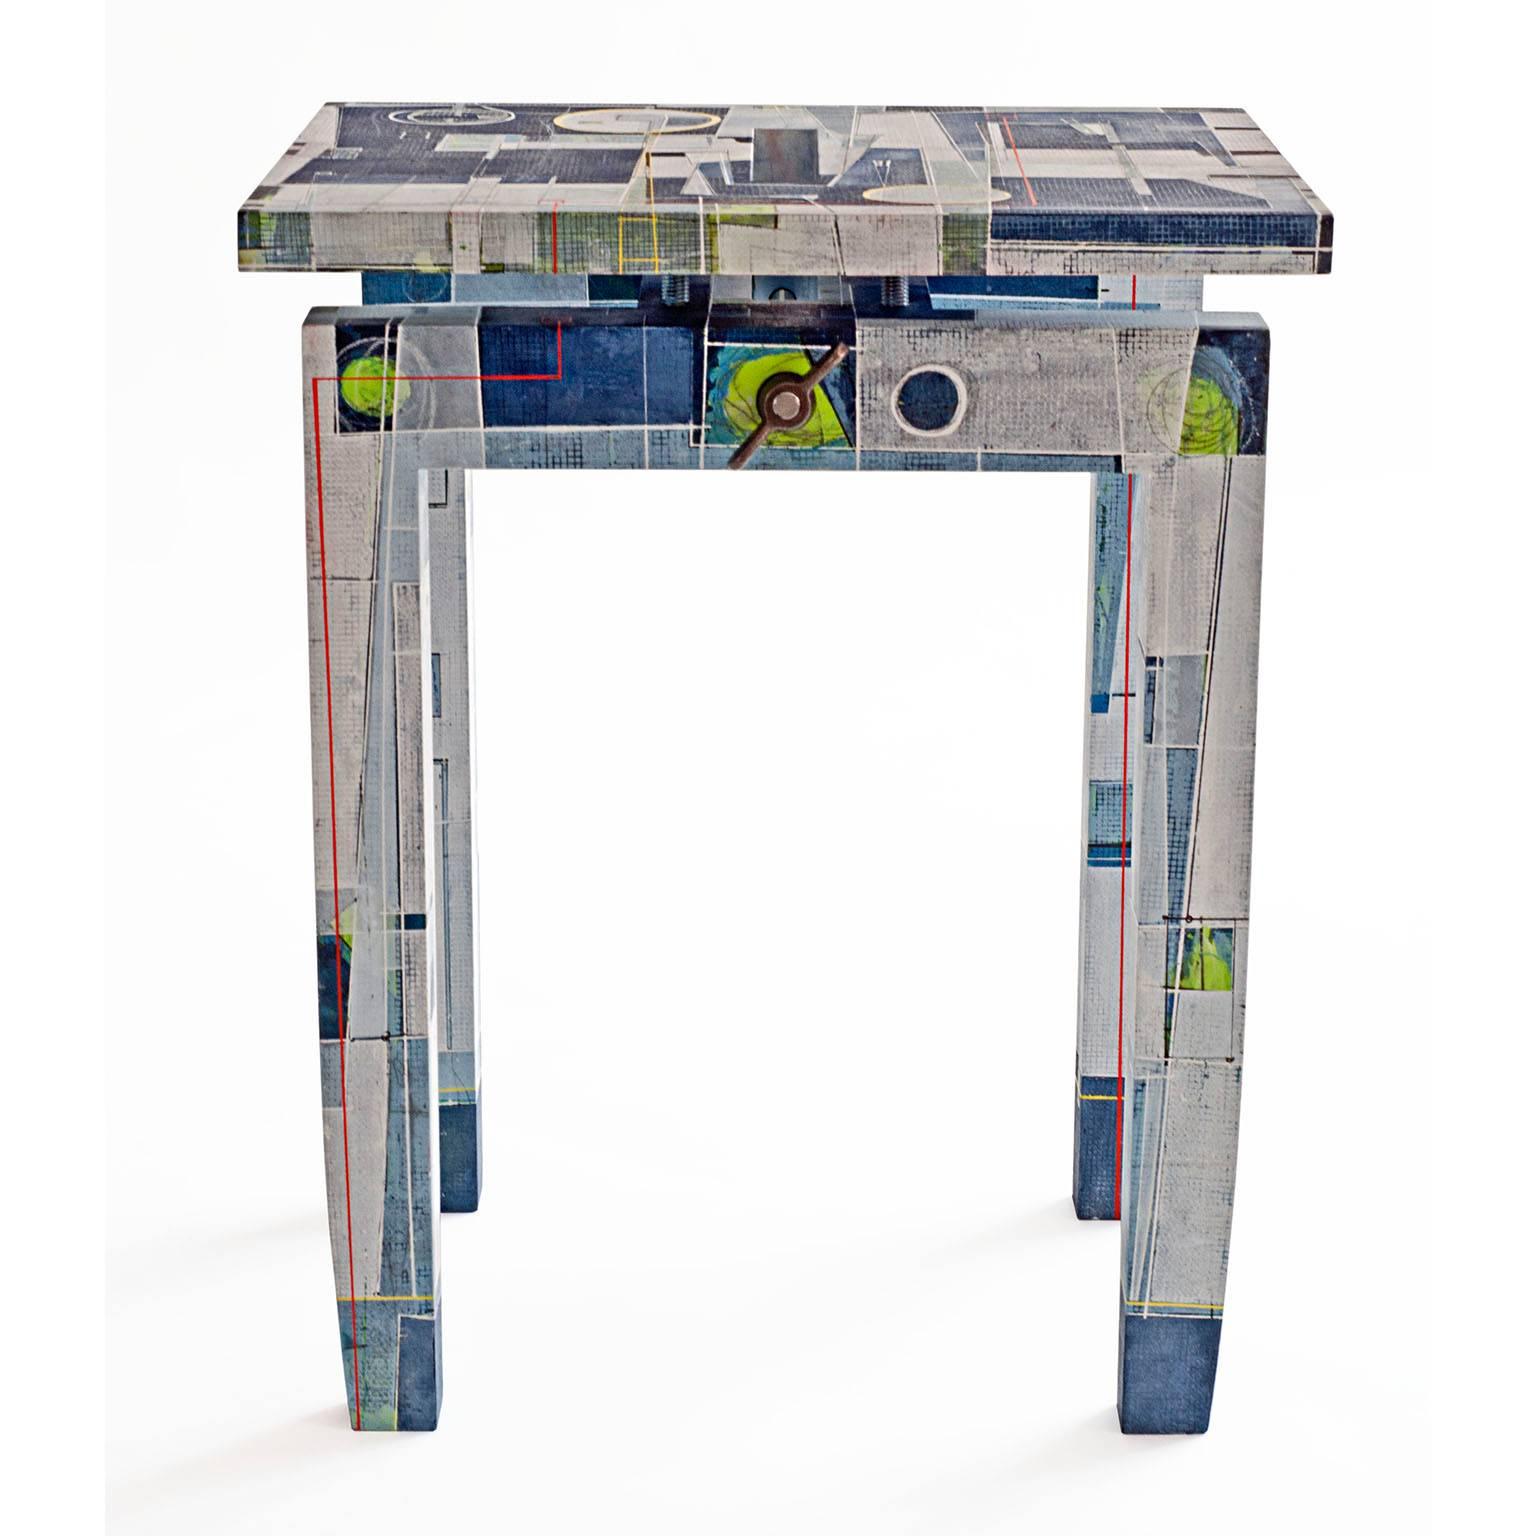 Benchlet "Color by Todd Germann" 2013

I love Todd Germann's work. His paintings are beautiful blueprints, intricately detailed and richly layered elevation drawings that conjure imagination-filling worlds of structure. Before he